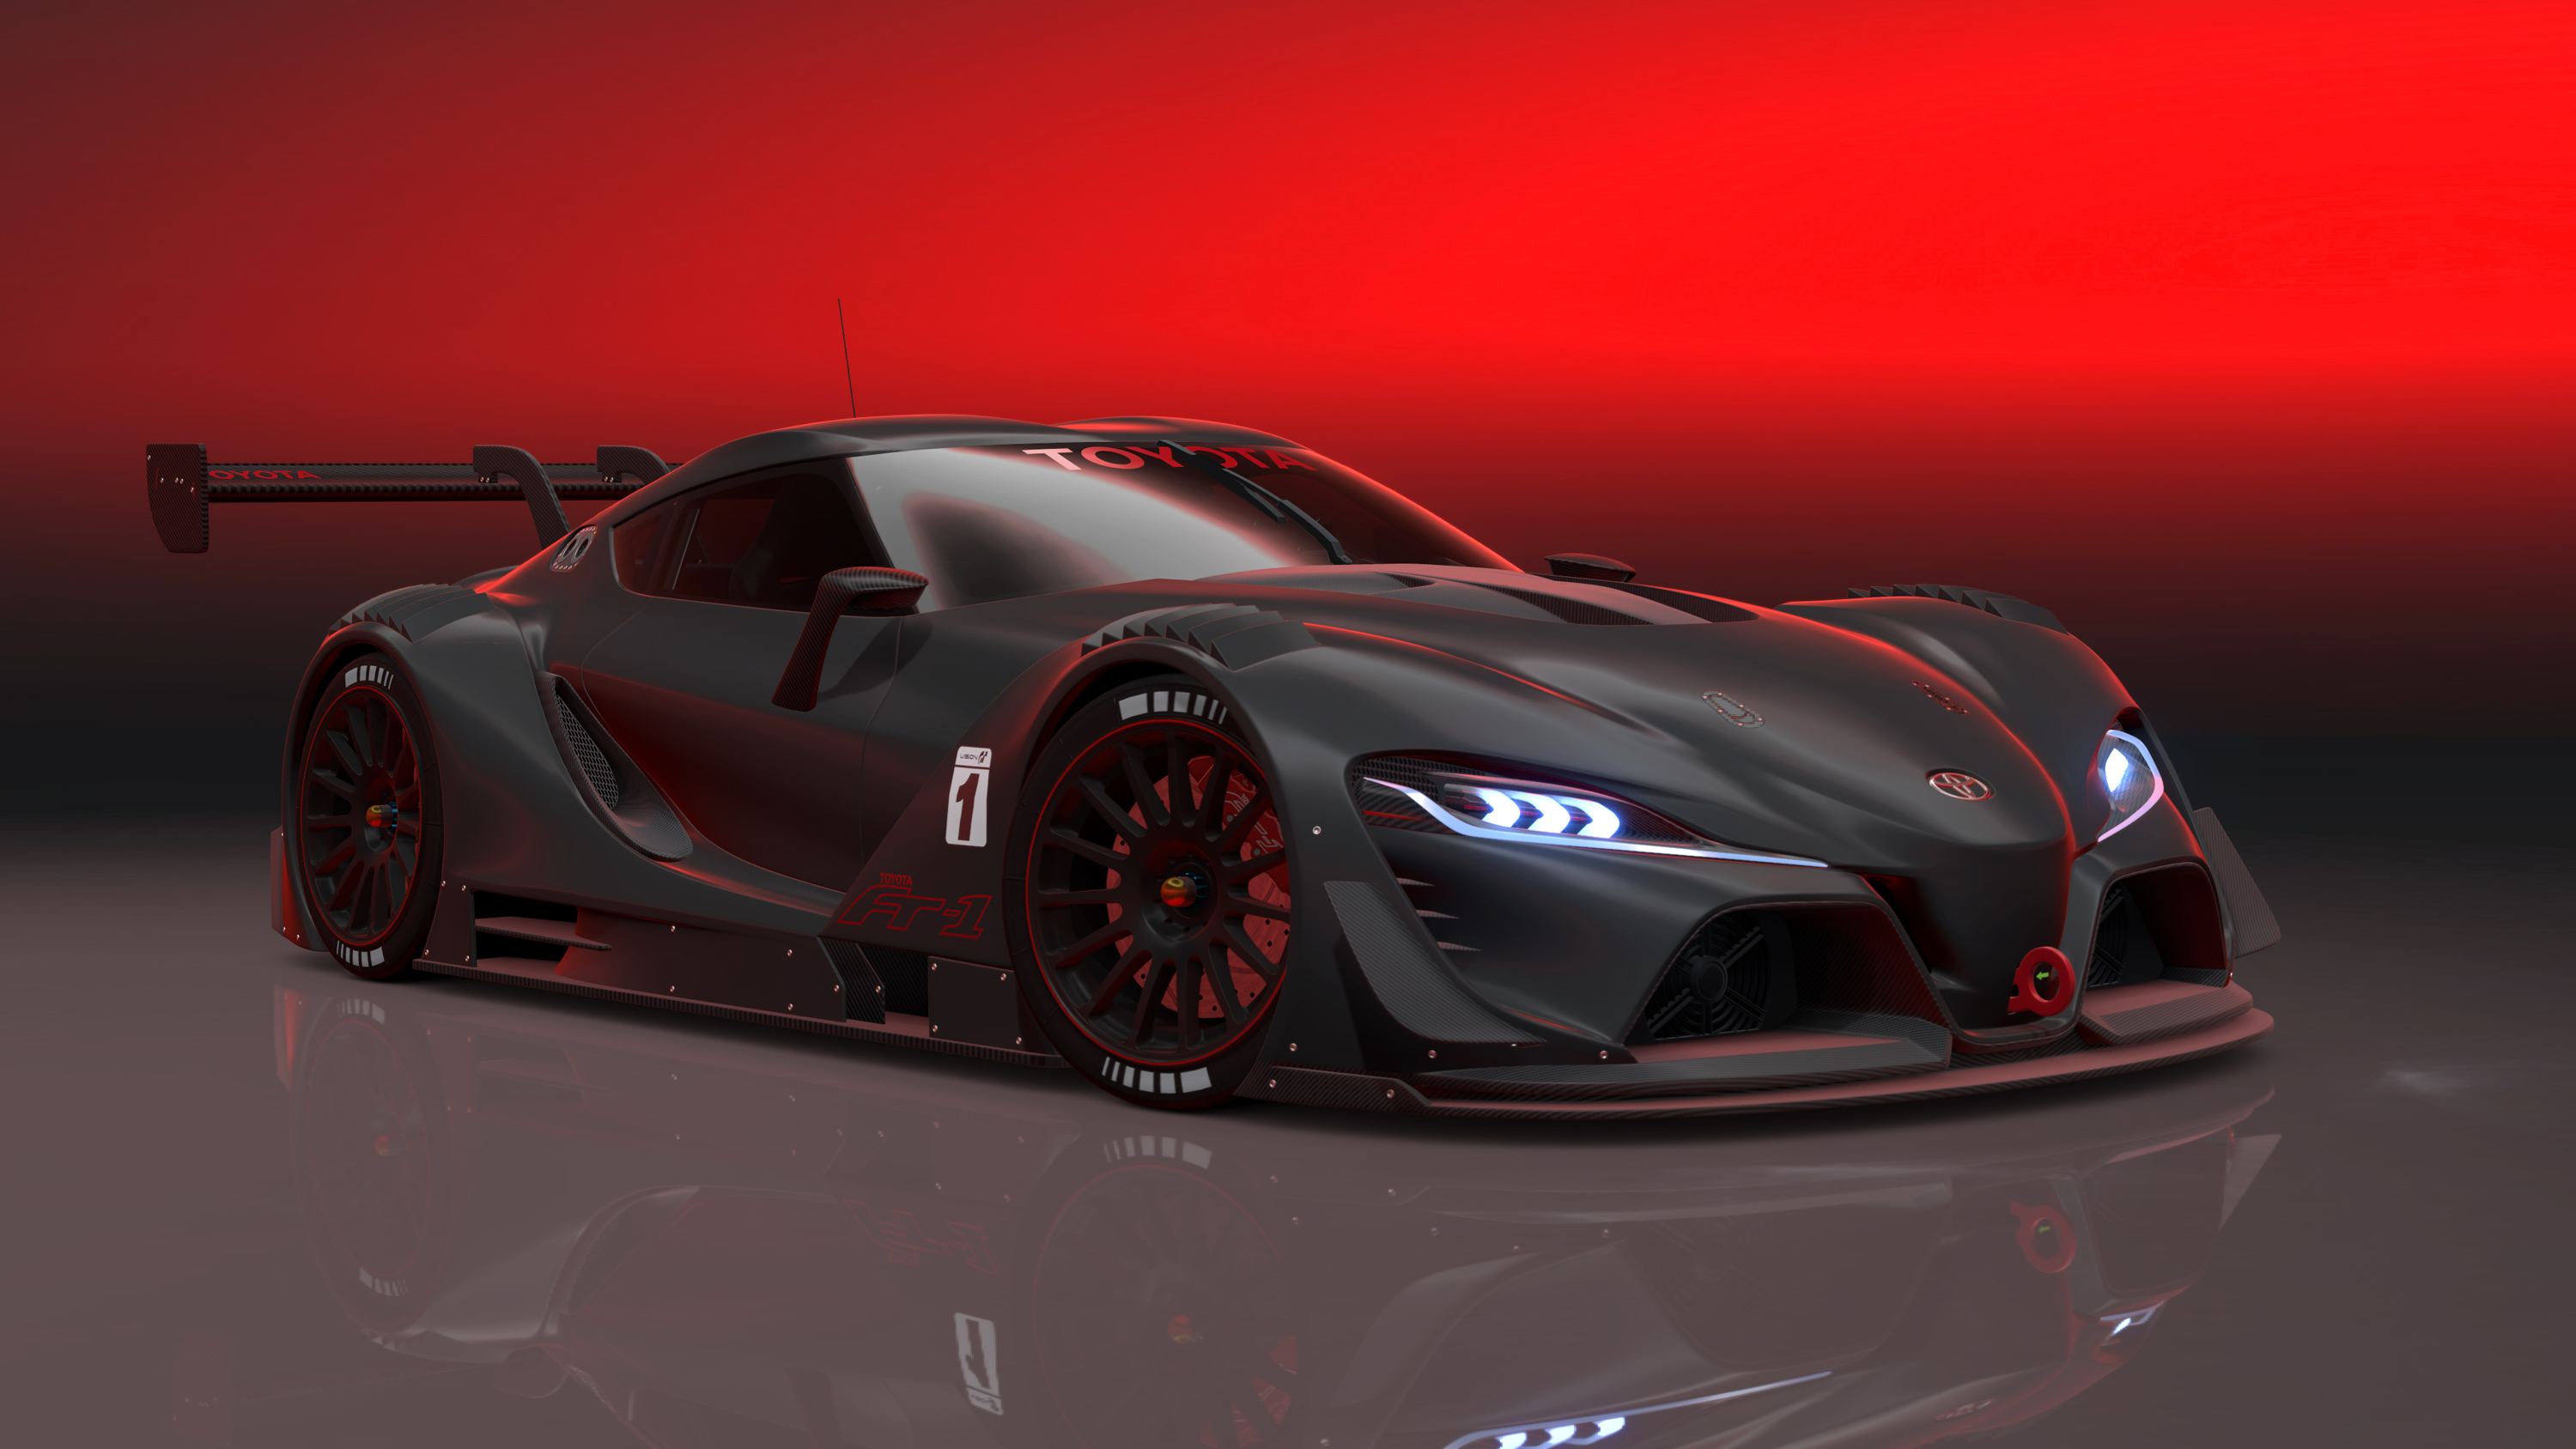 2014 Toyota Ft 1 Vision Gt 5 Wallpapers